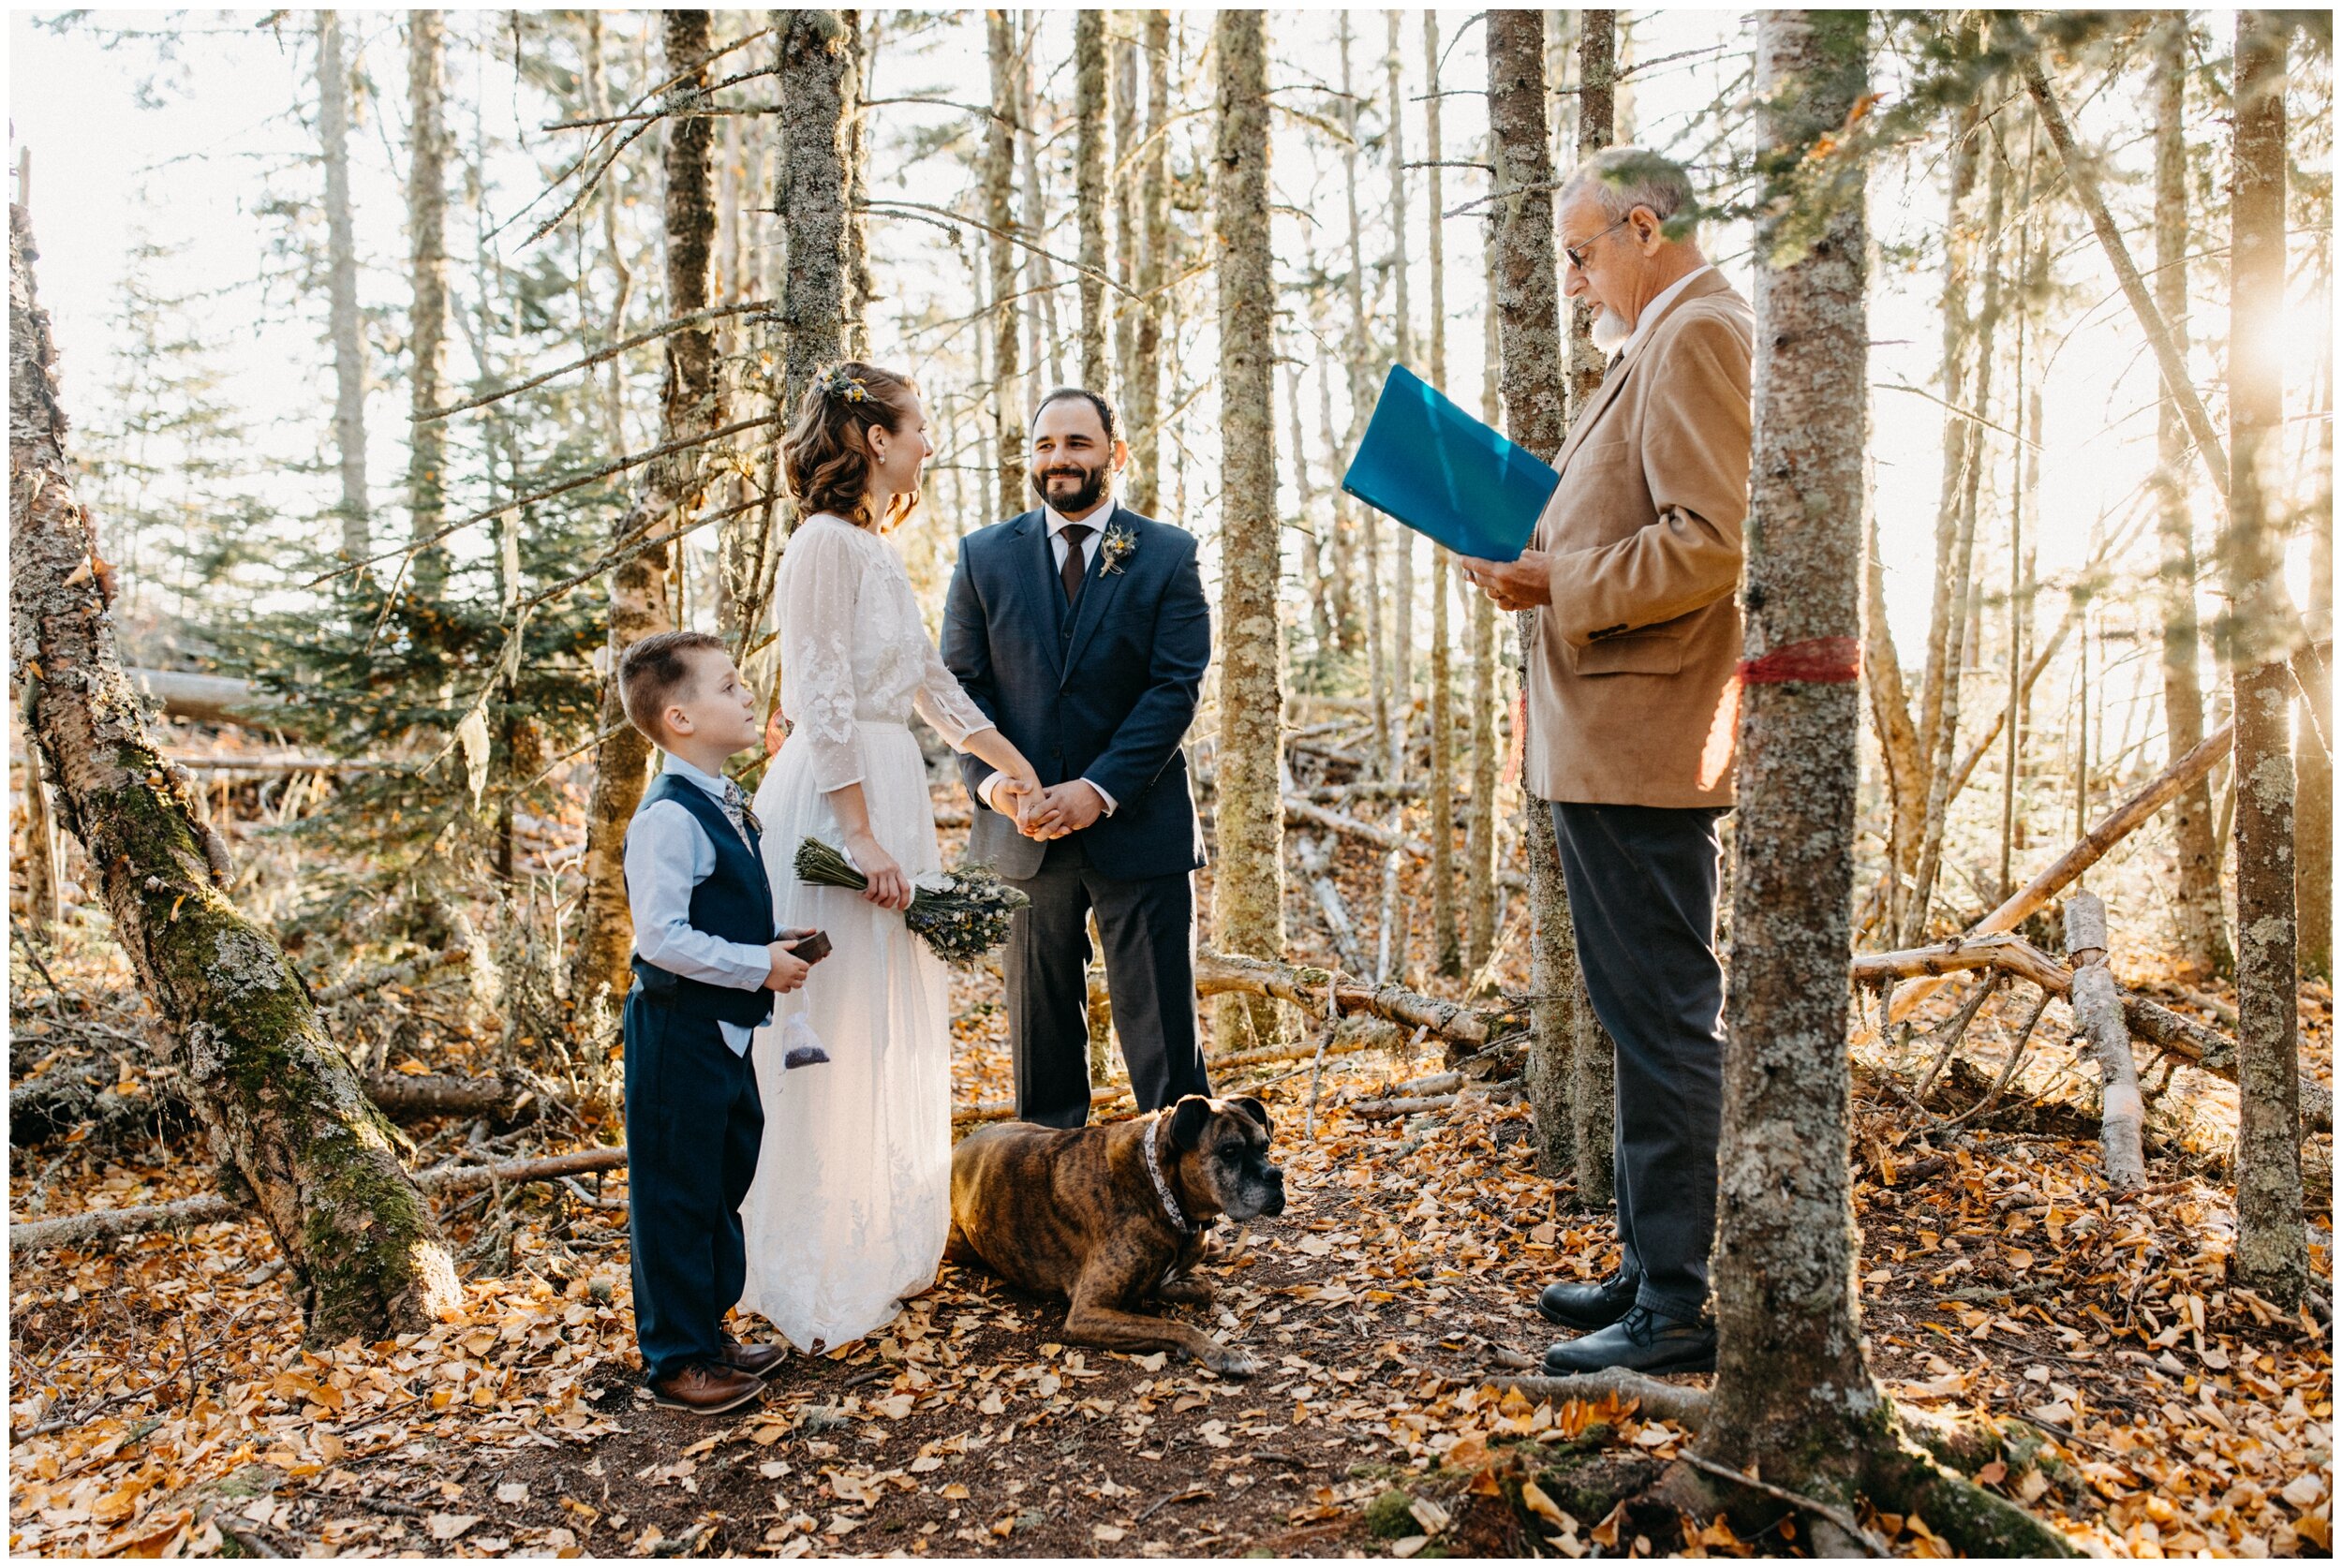 Intimate wedding ceremony in the woods on Artists' Point in Grand Marais, Minnesota